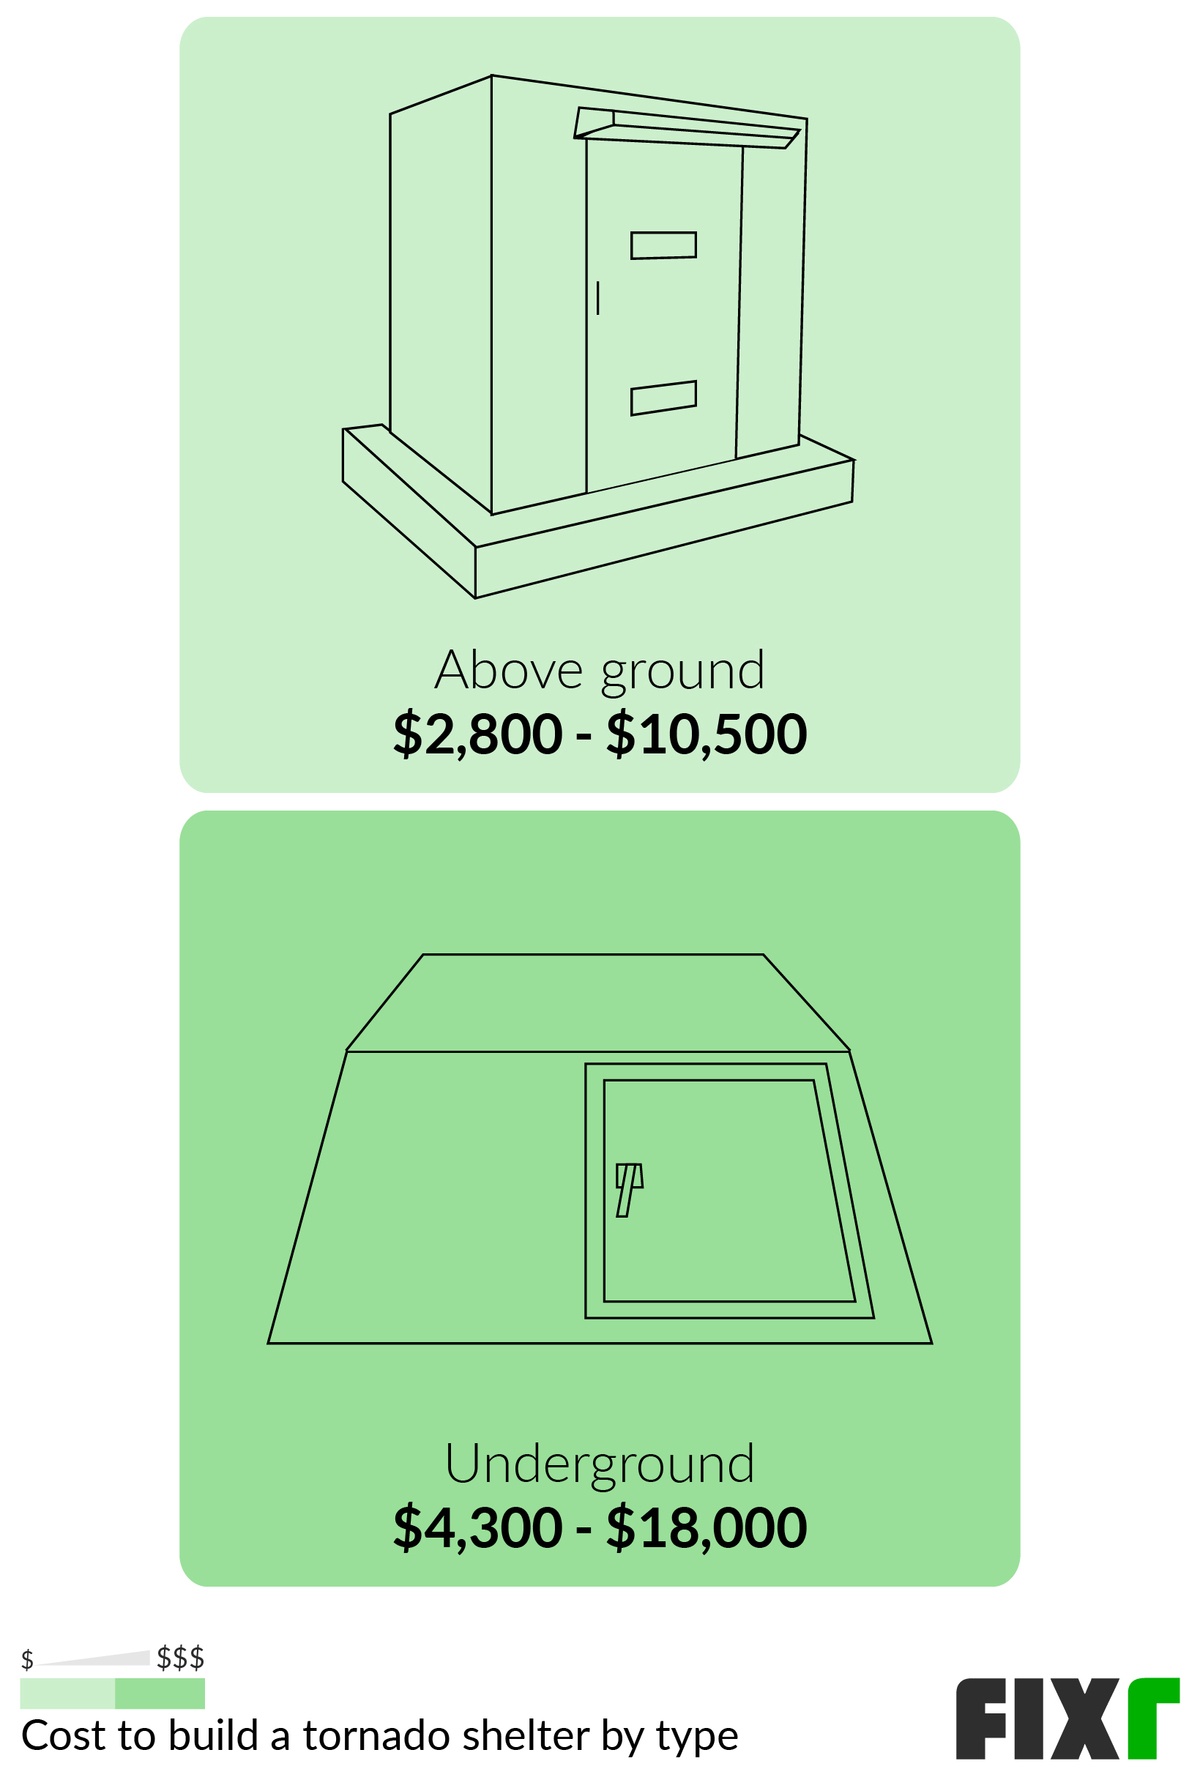 Cost to Build a Storm Shelter | Cost to Build a Tornado Shelter